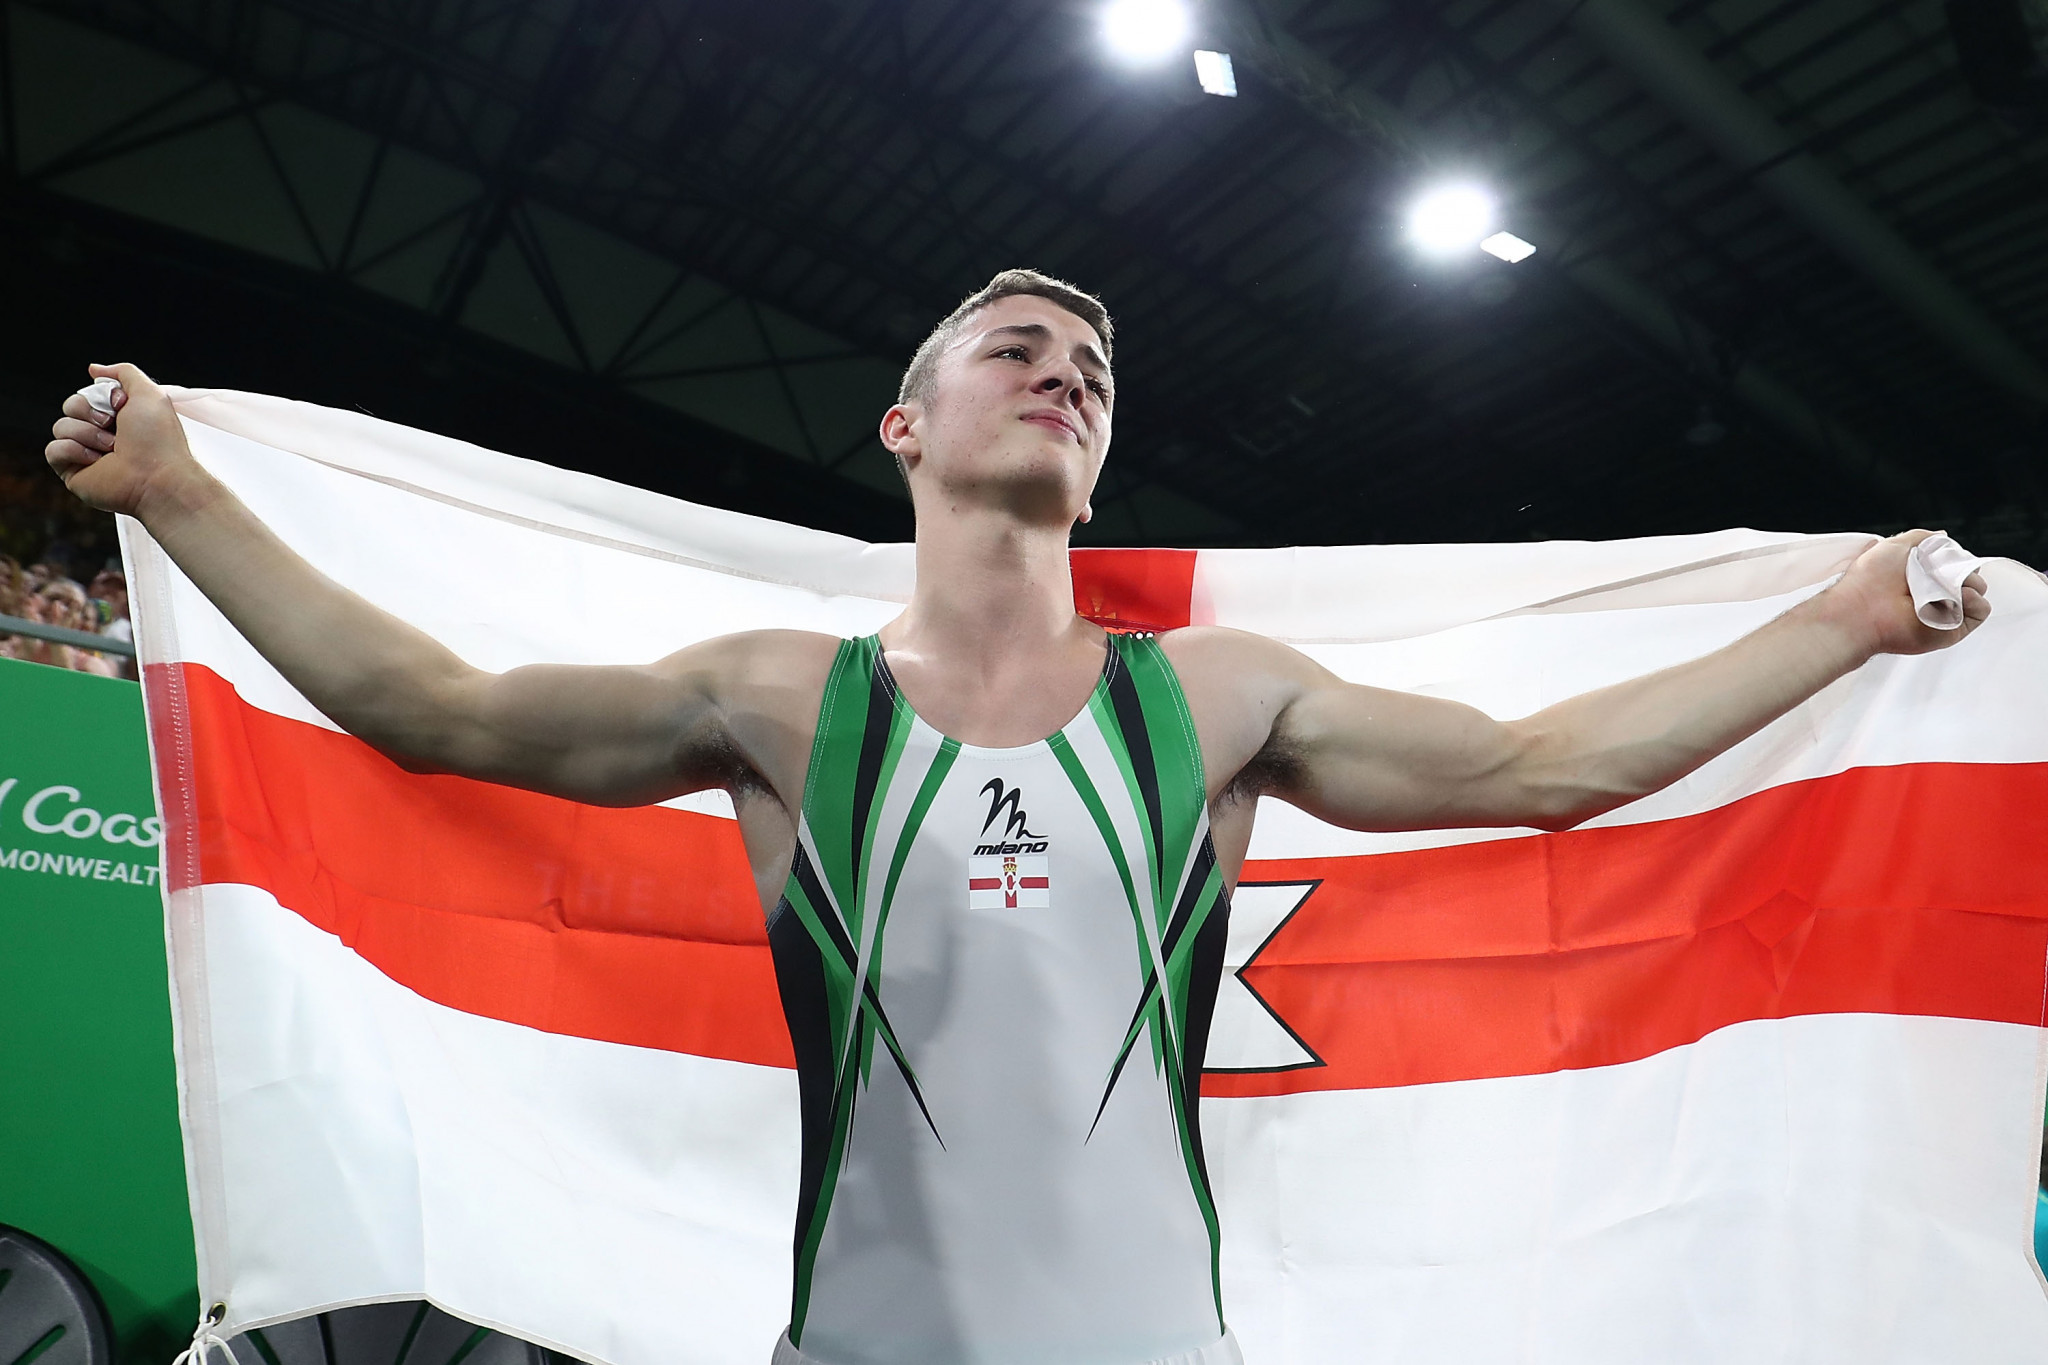 OFI call for reverse decision to allow Northern Irish gymnasts to compete at Birmingham 2022